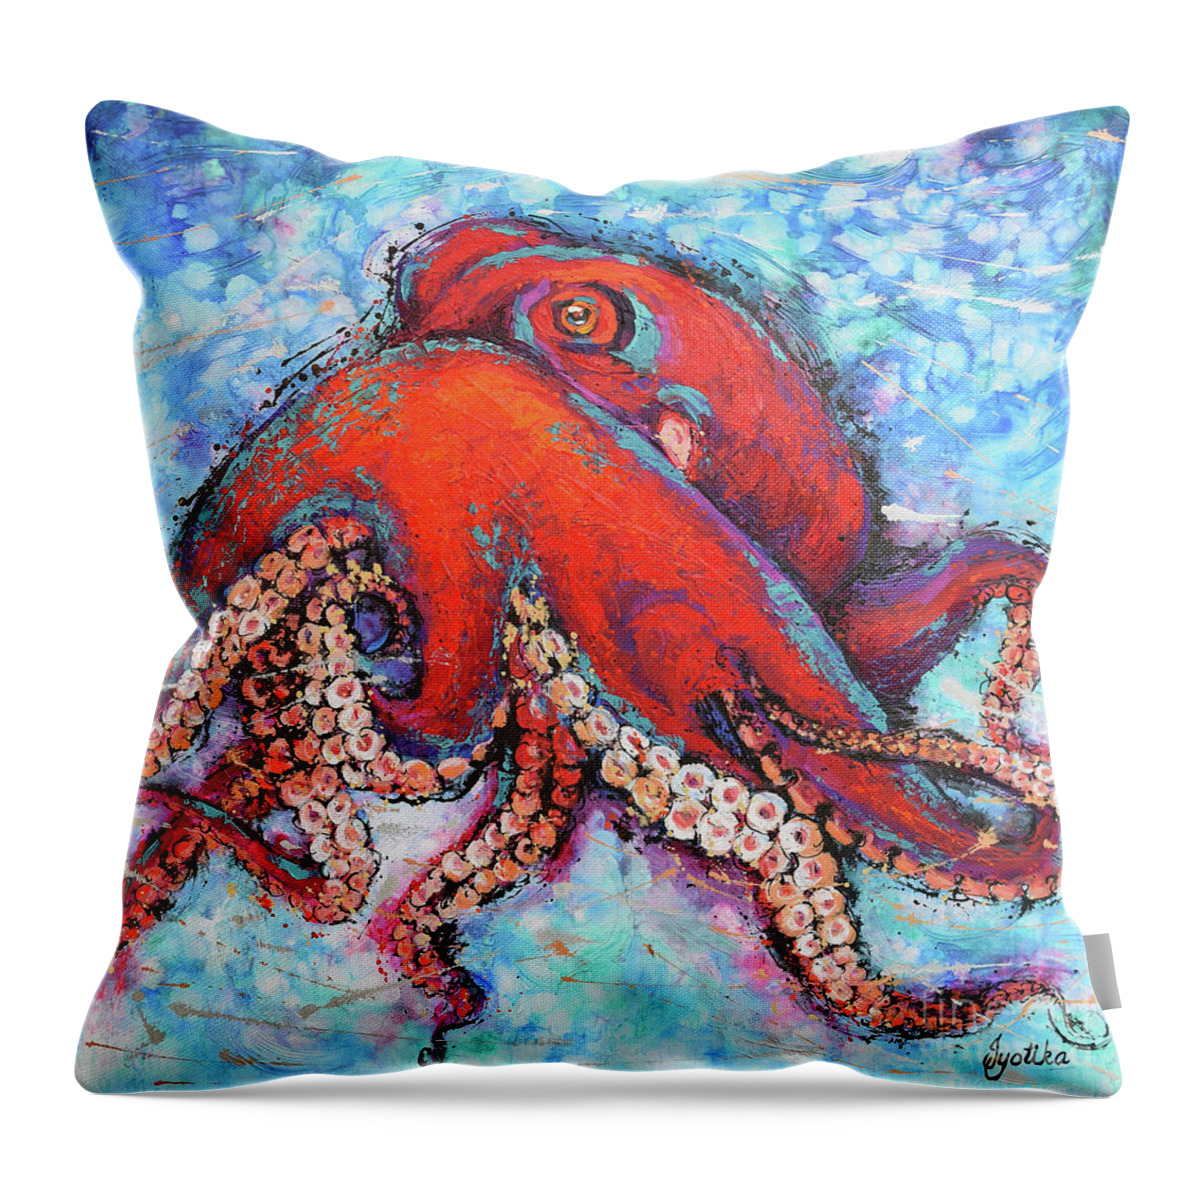 Octopus Throw Pillow featuring the painting Octopus by Jyotika Shroff